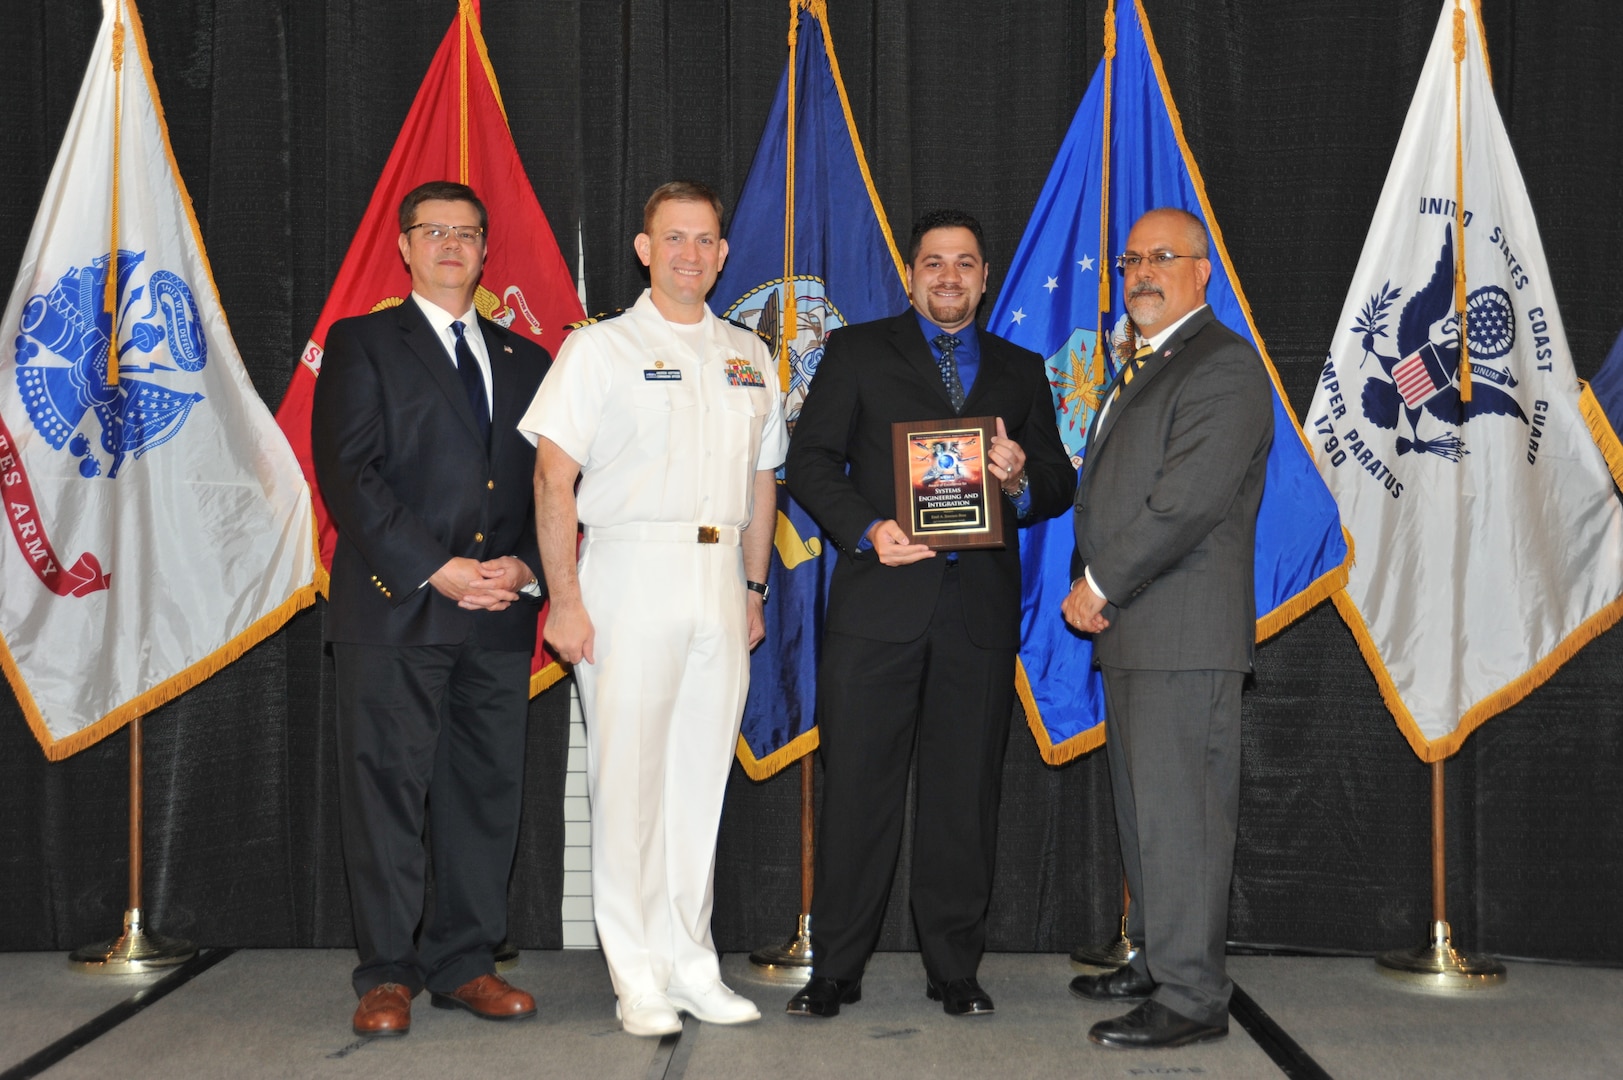 IMAGE: Emil Jimenez-Brea is presented the Award of Excellence for Systems Engineering and Integration at Naval Surface Warfare Center Dahlgren Division's annual awards ceremony, Apr. 26 at the Fredericksburg Expo and Conference Center.

The Award of Excellence for Systems Engineering and Integration was established to recognize individuals who have made a notable and significant impact to NSWCDD through their outstanding performance in systems engineering and integration.